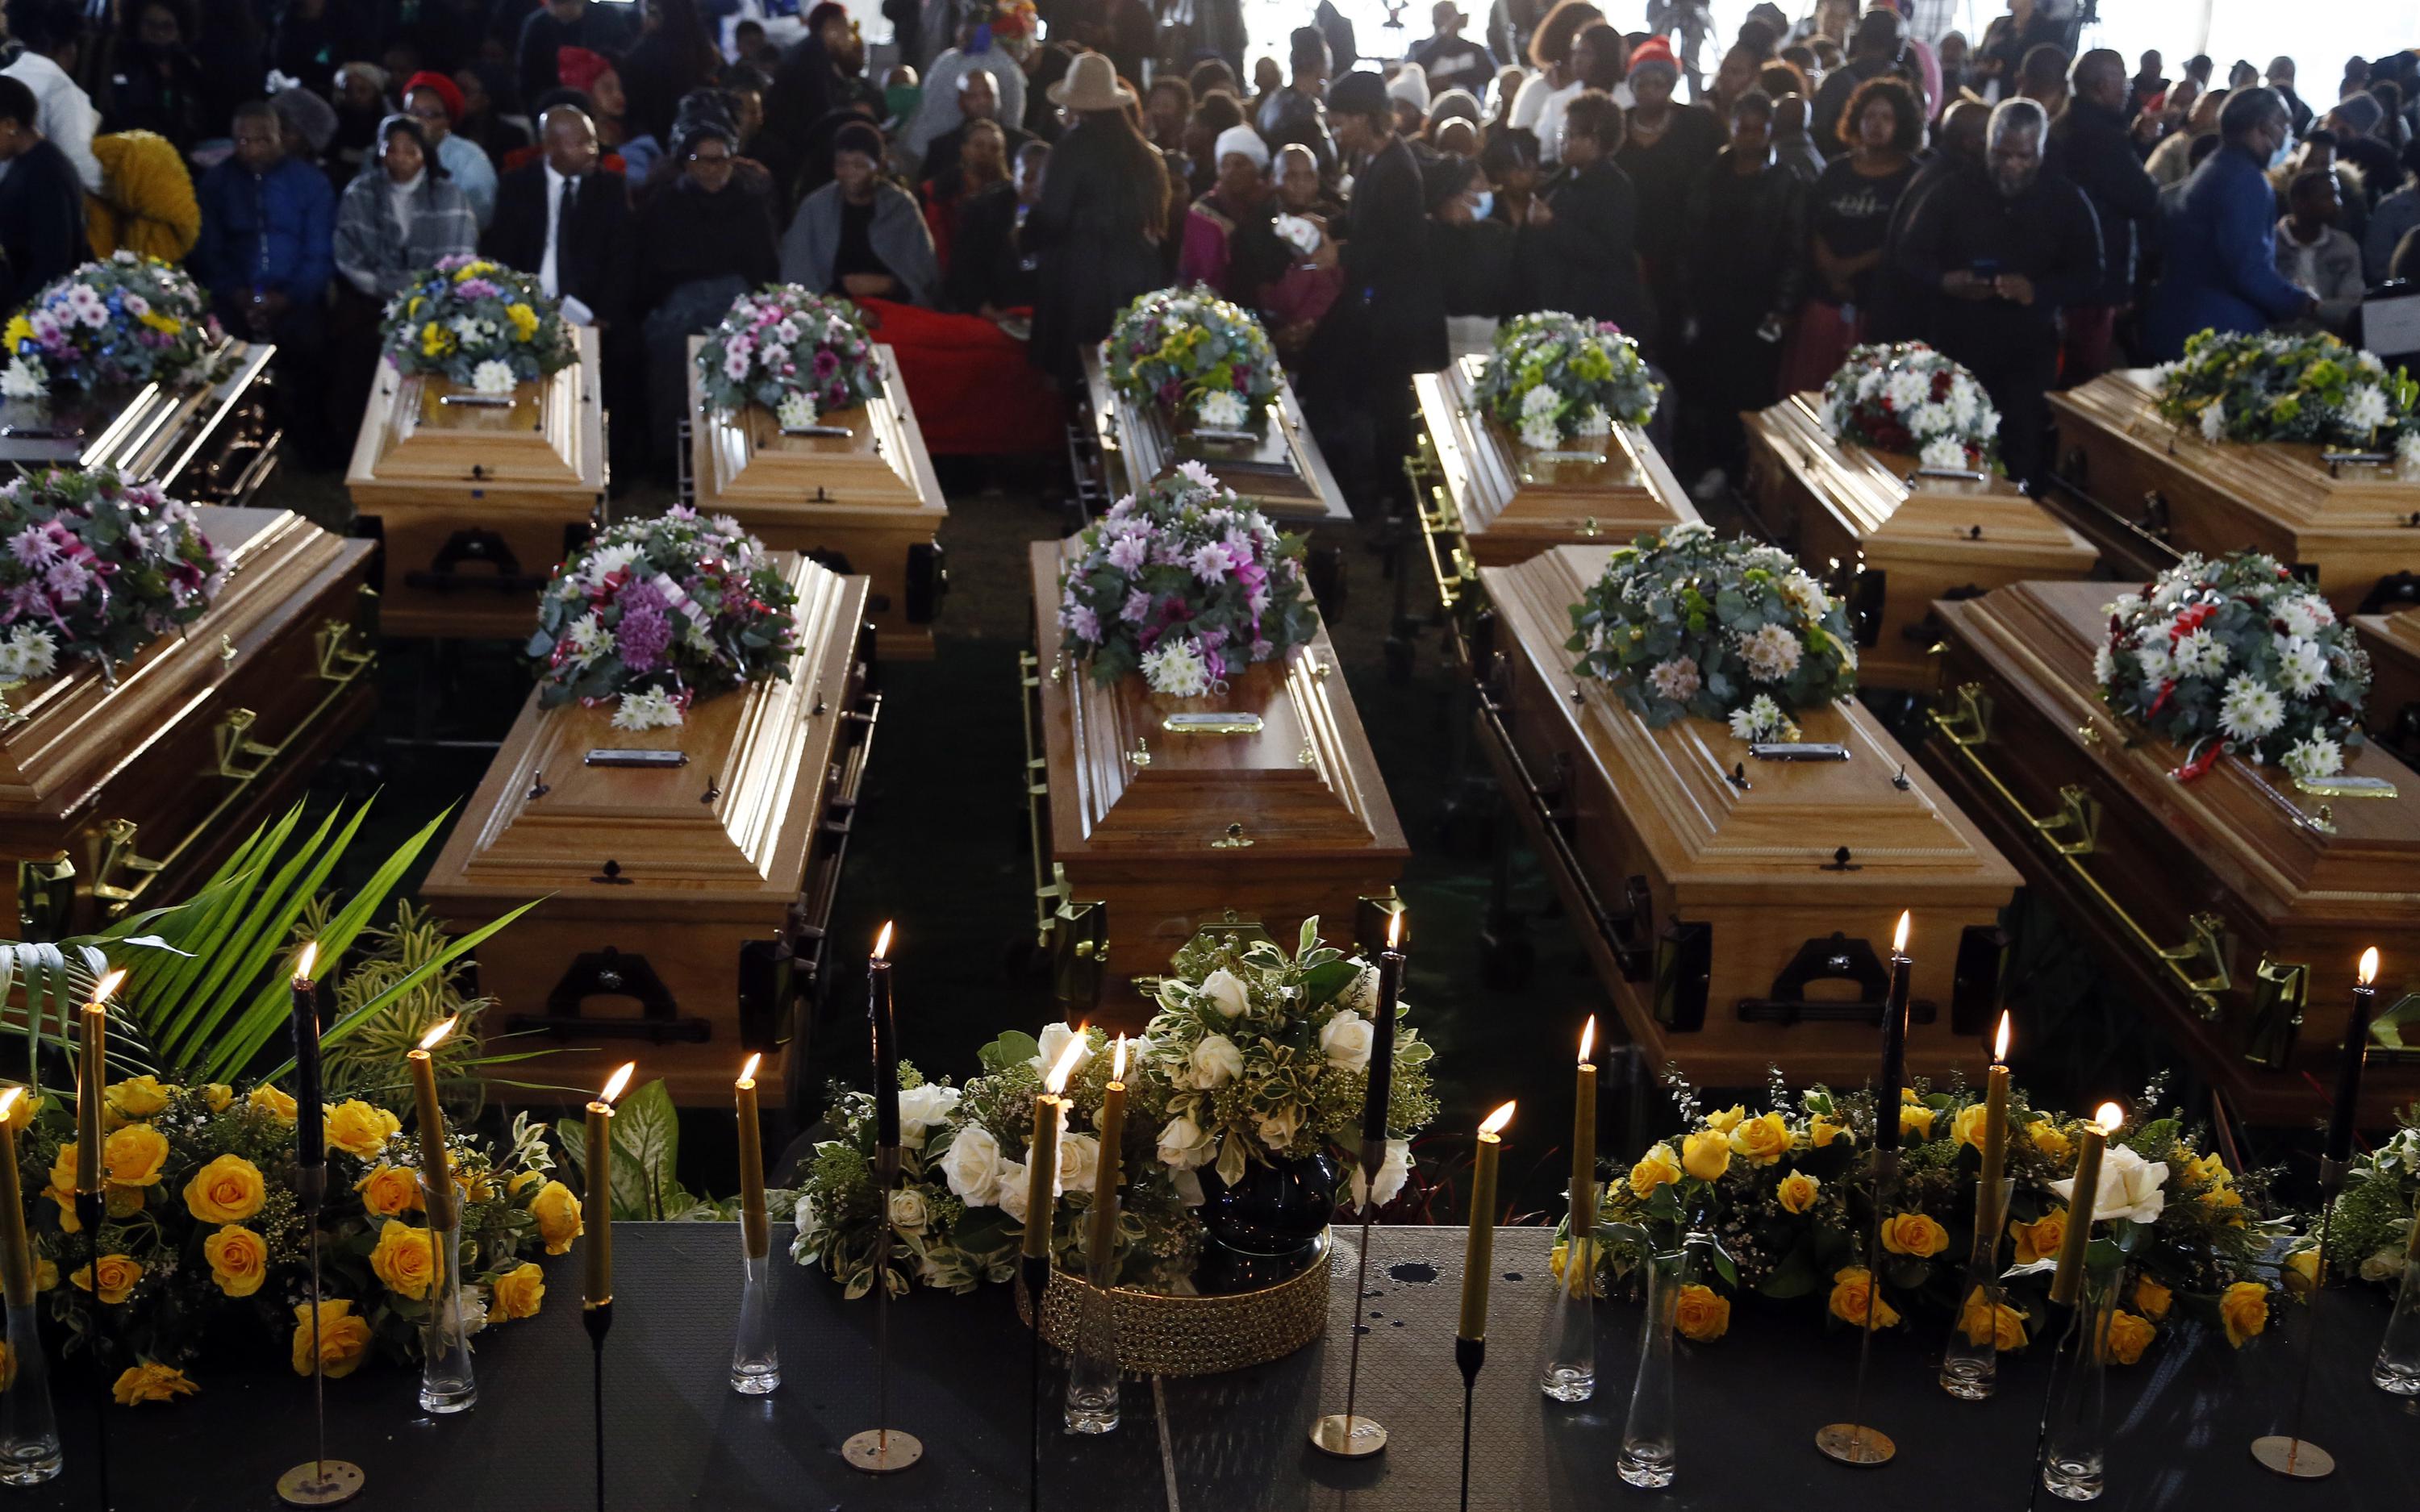 South Africa holds funeral for 21 teens who died in tavern – The Associated Press – en Español